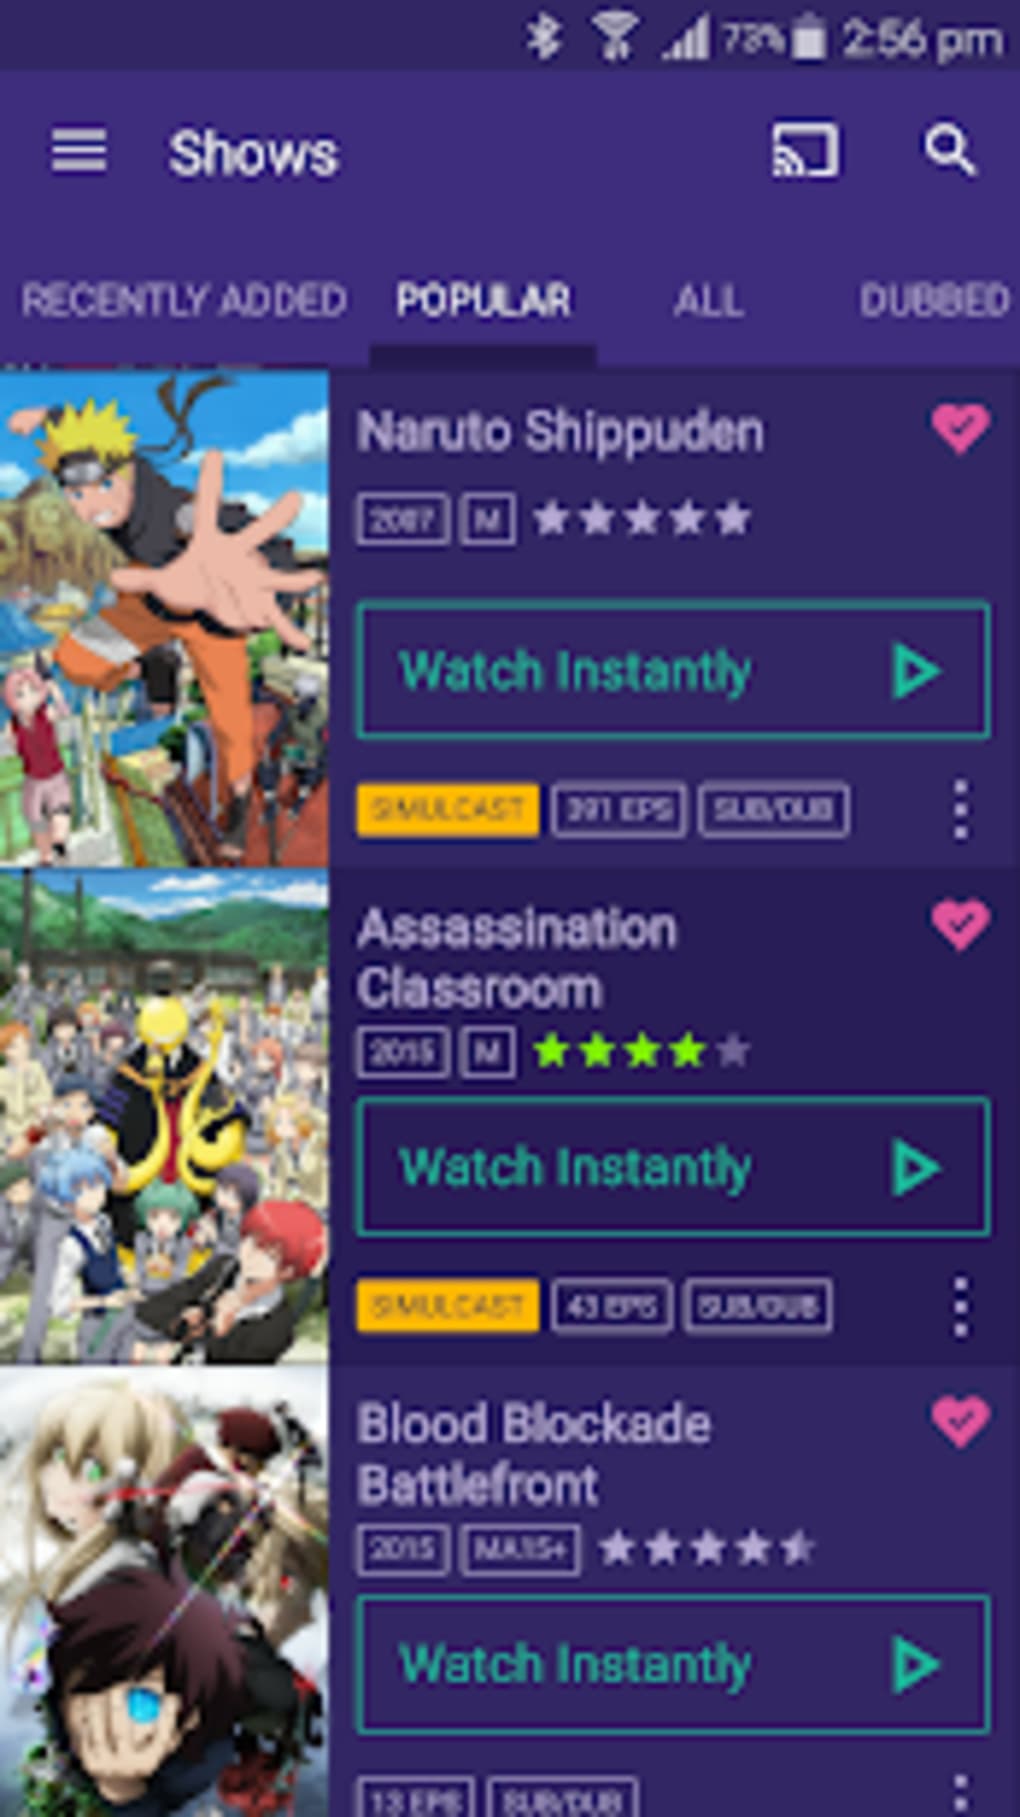 AnimeLab for iPhone - Download